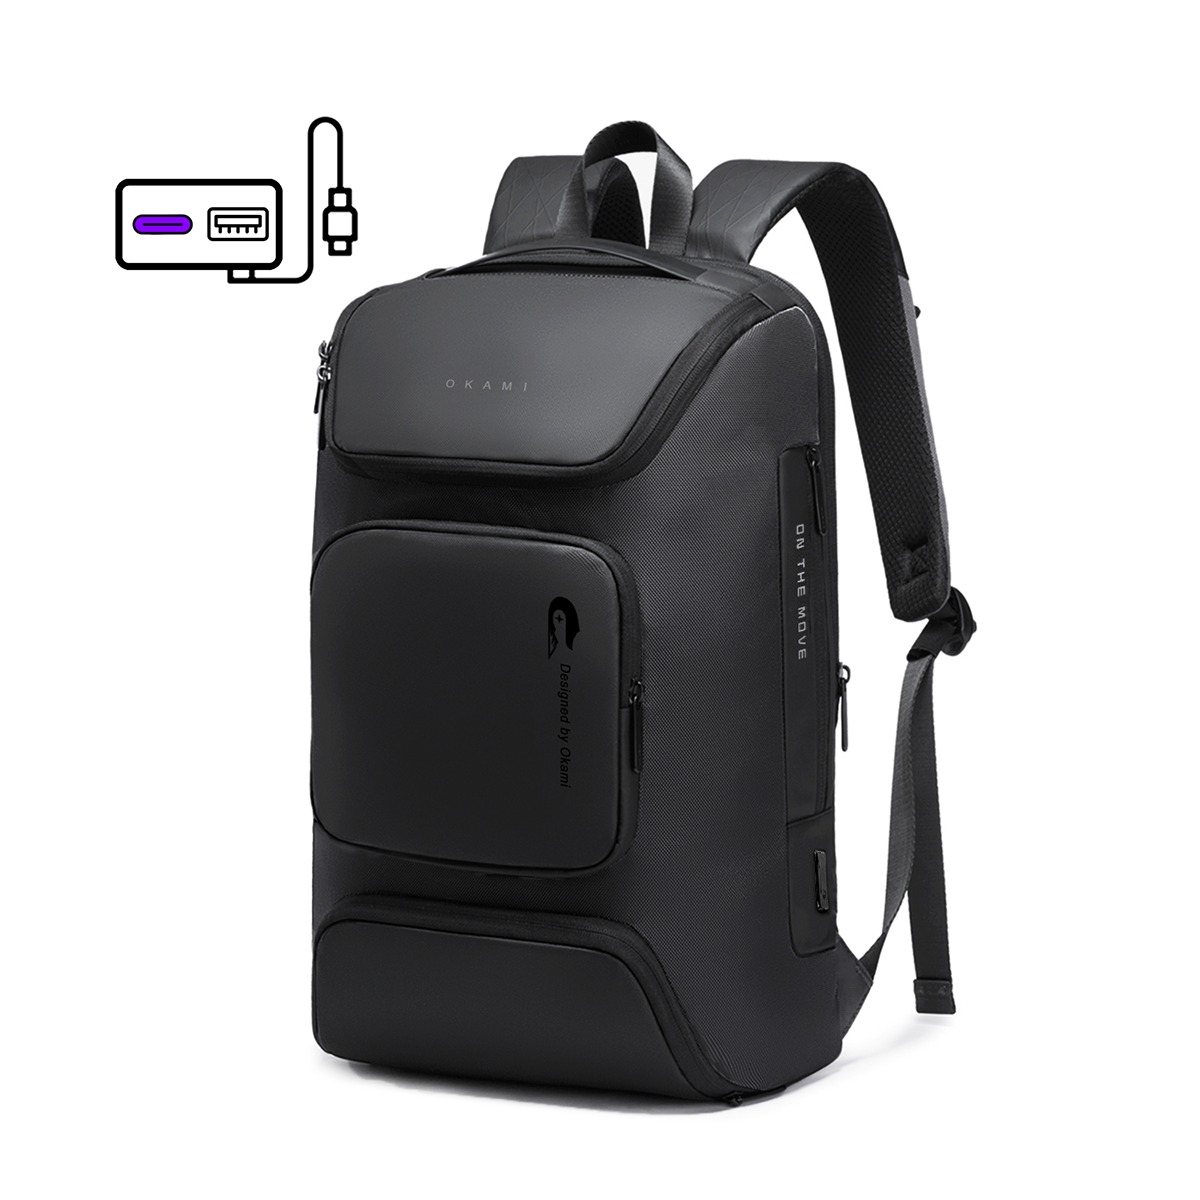 Nomad Laptop Backpack with Integrated Dual USB PD 3.0 Type-C Fast-Charging Upto 35 Watts (Black)